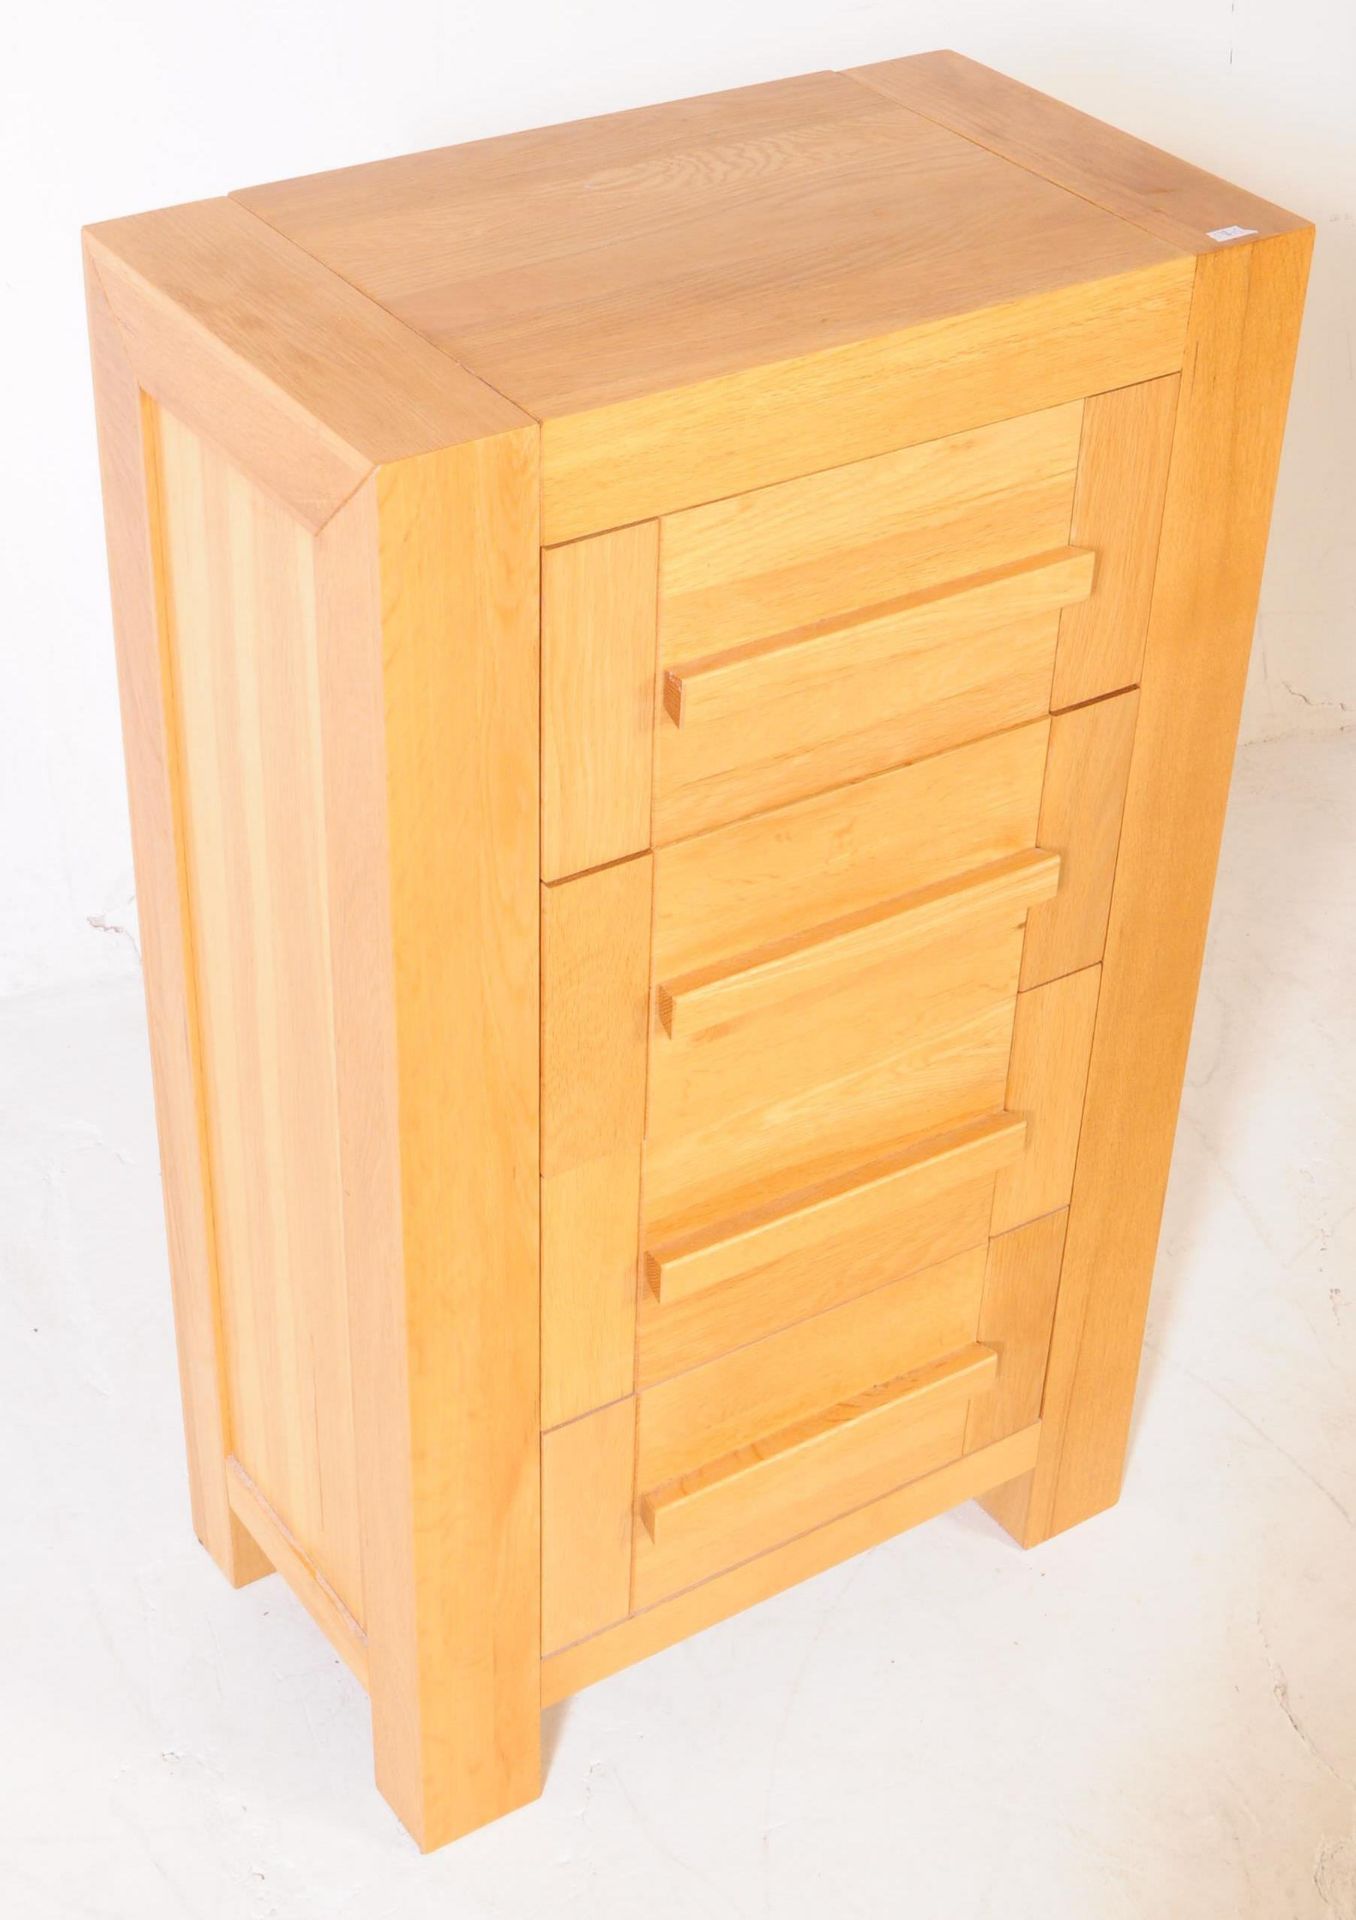 M&S SONOMA - PAIR OF OAK BEDSIDE TABLES - Image 3 of 11